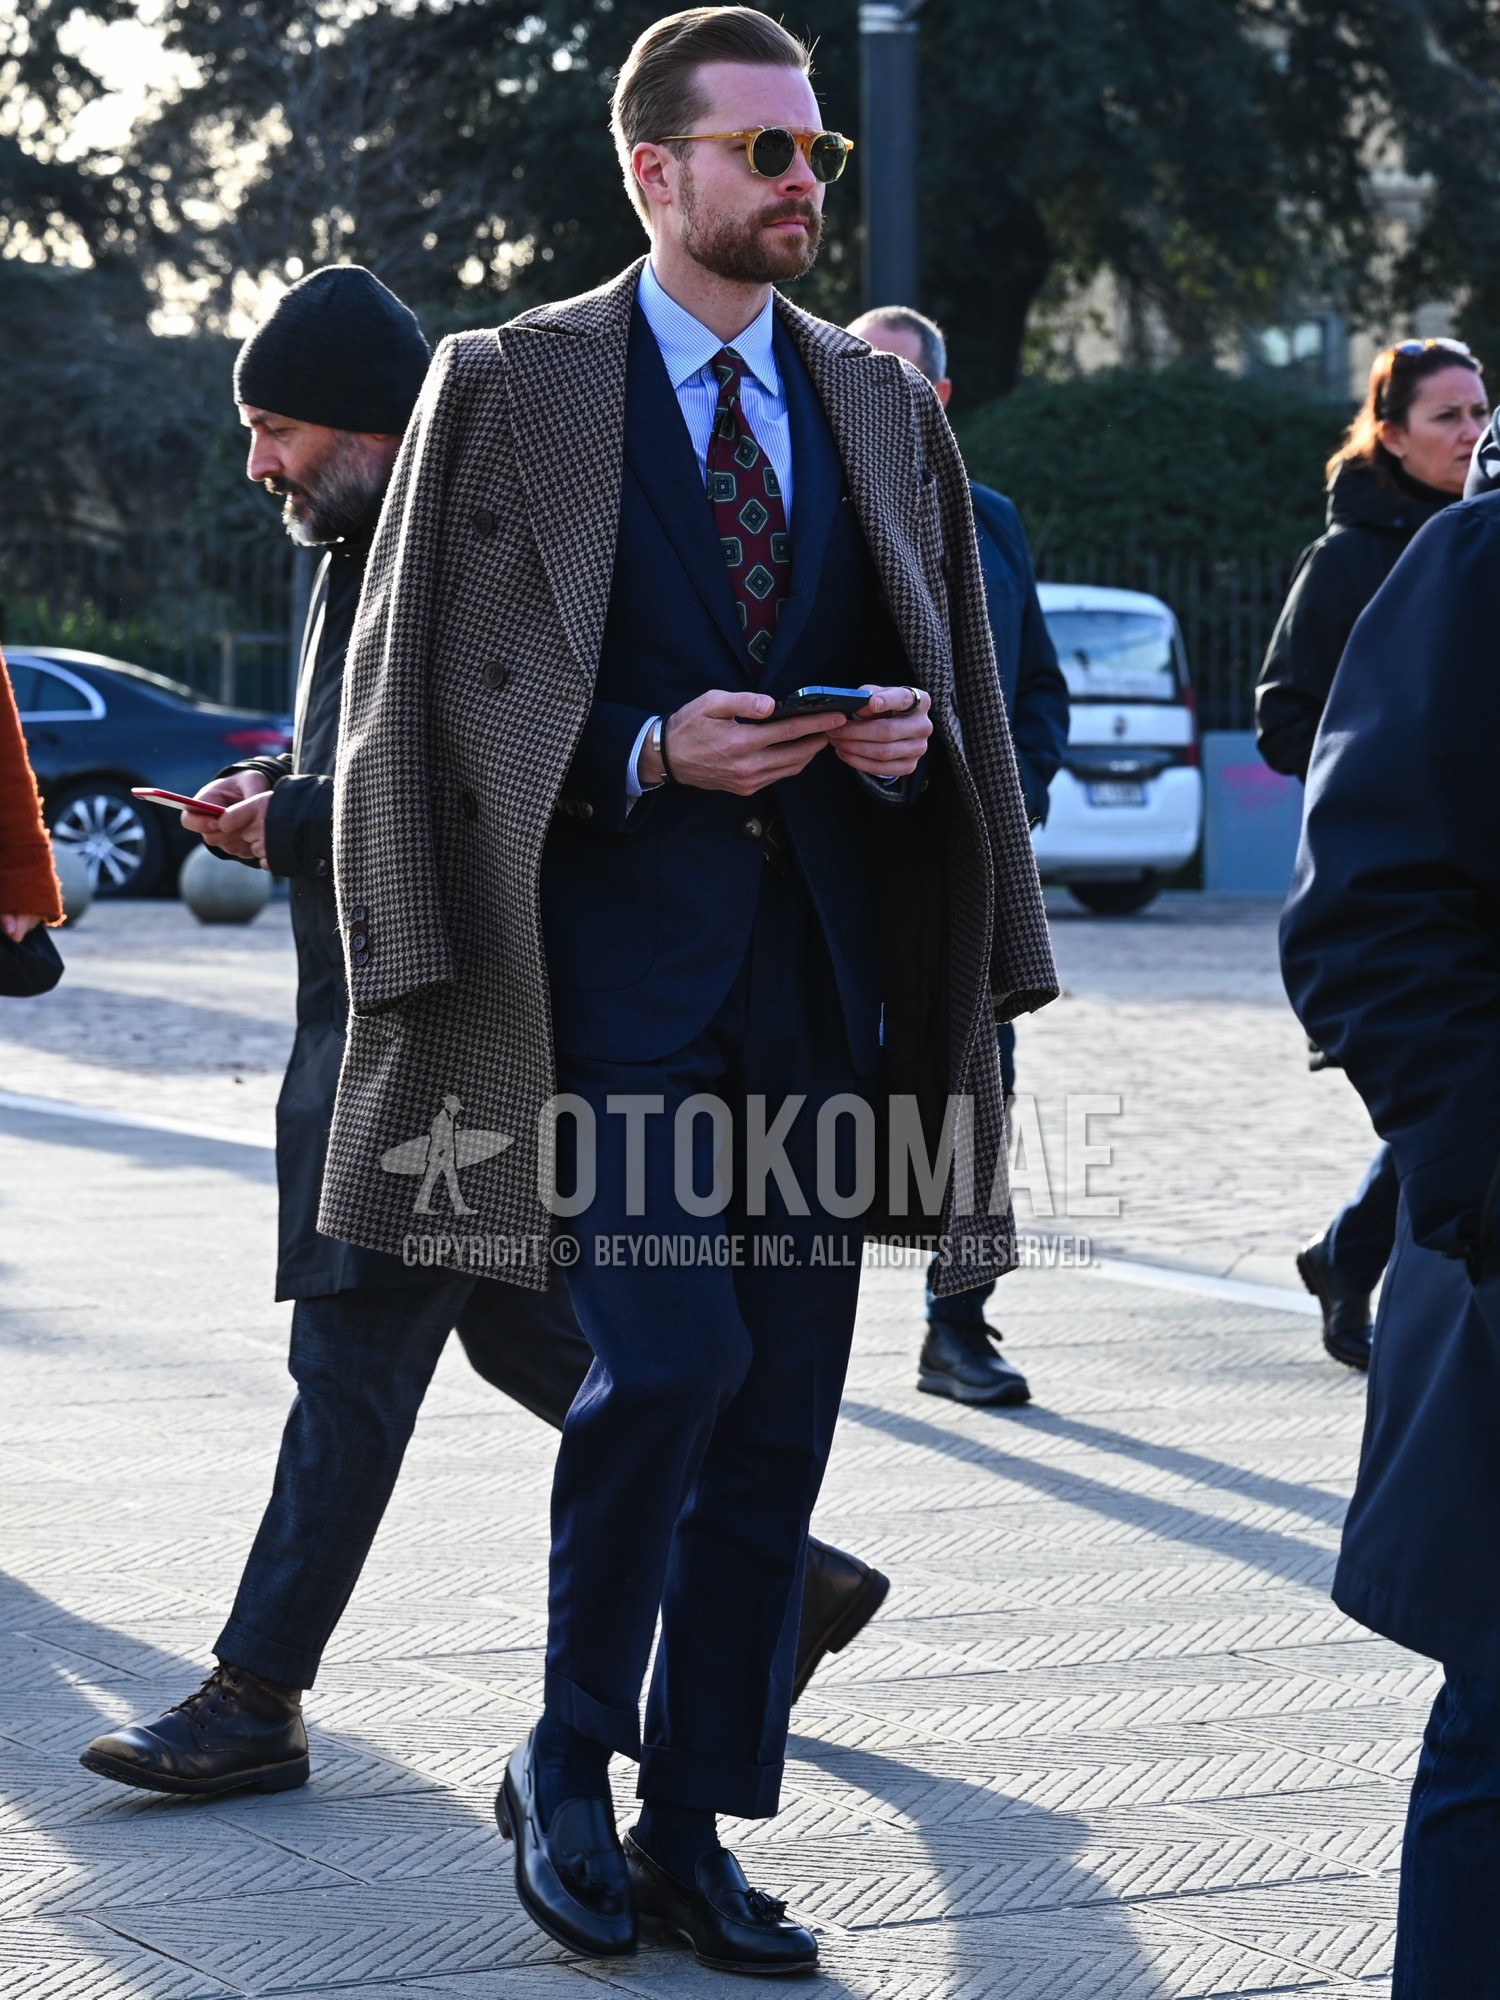 Men's autumn winter outfit with brown plain sunglasses, gray check chester coat, blue stripes shirt, navy plain socks, black tassel loafers leather shoes, navy plain suit, red graphic necktie.